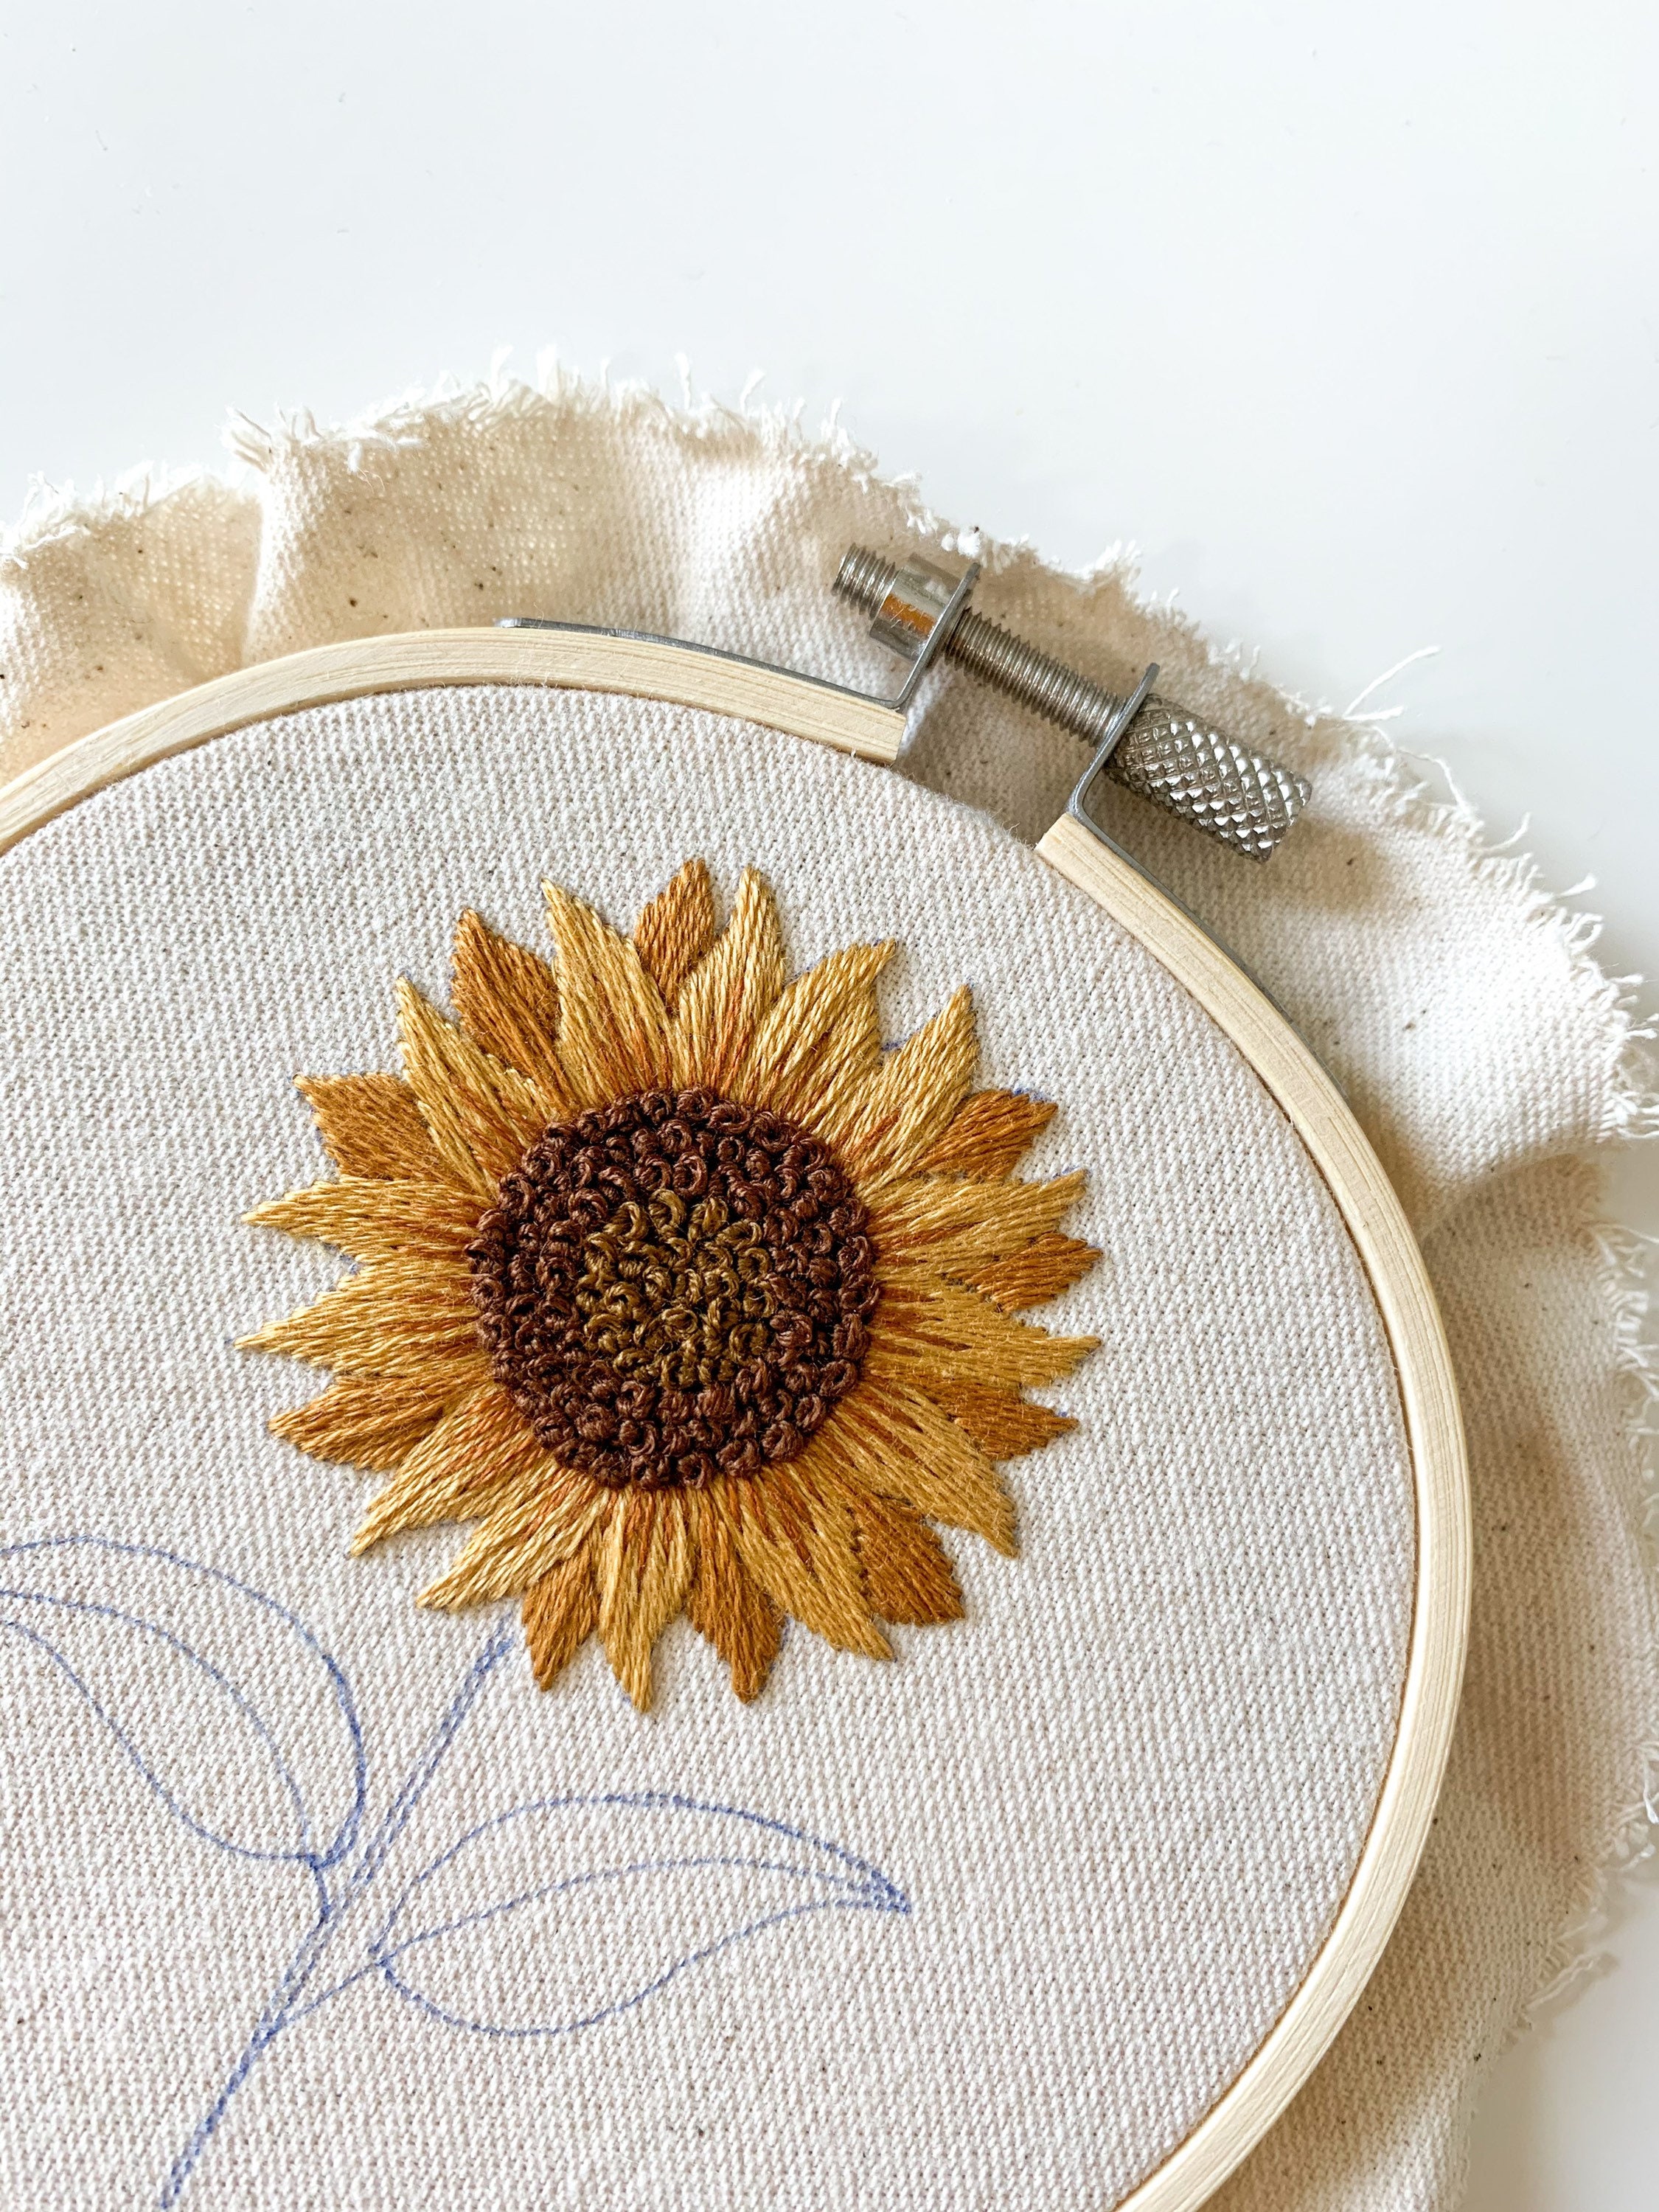 Dropship 11CT Stamped Cross Stitch Kits Sunflower Living Room Wall Decor  DIY Embroidery Kits, 9x13inch to Sell Online at a Lower Price